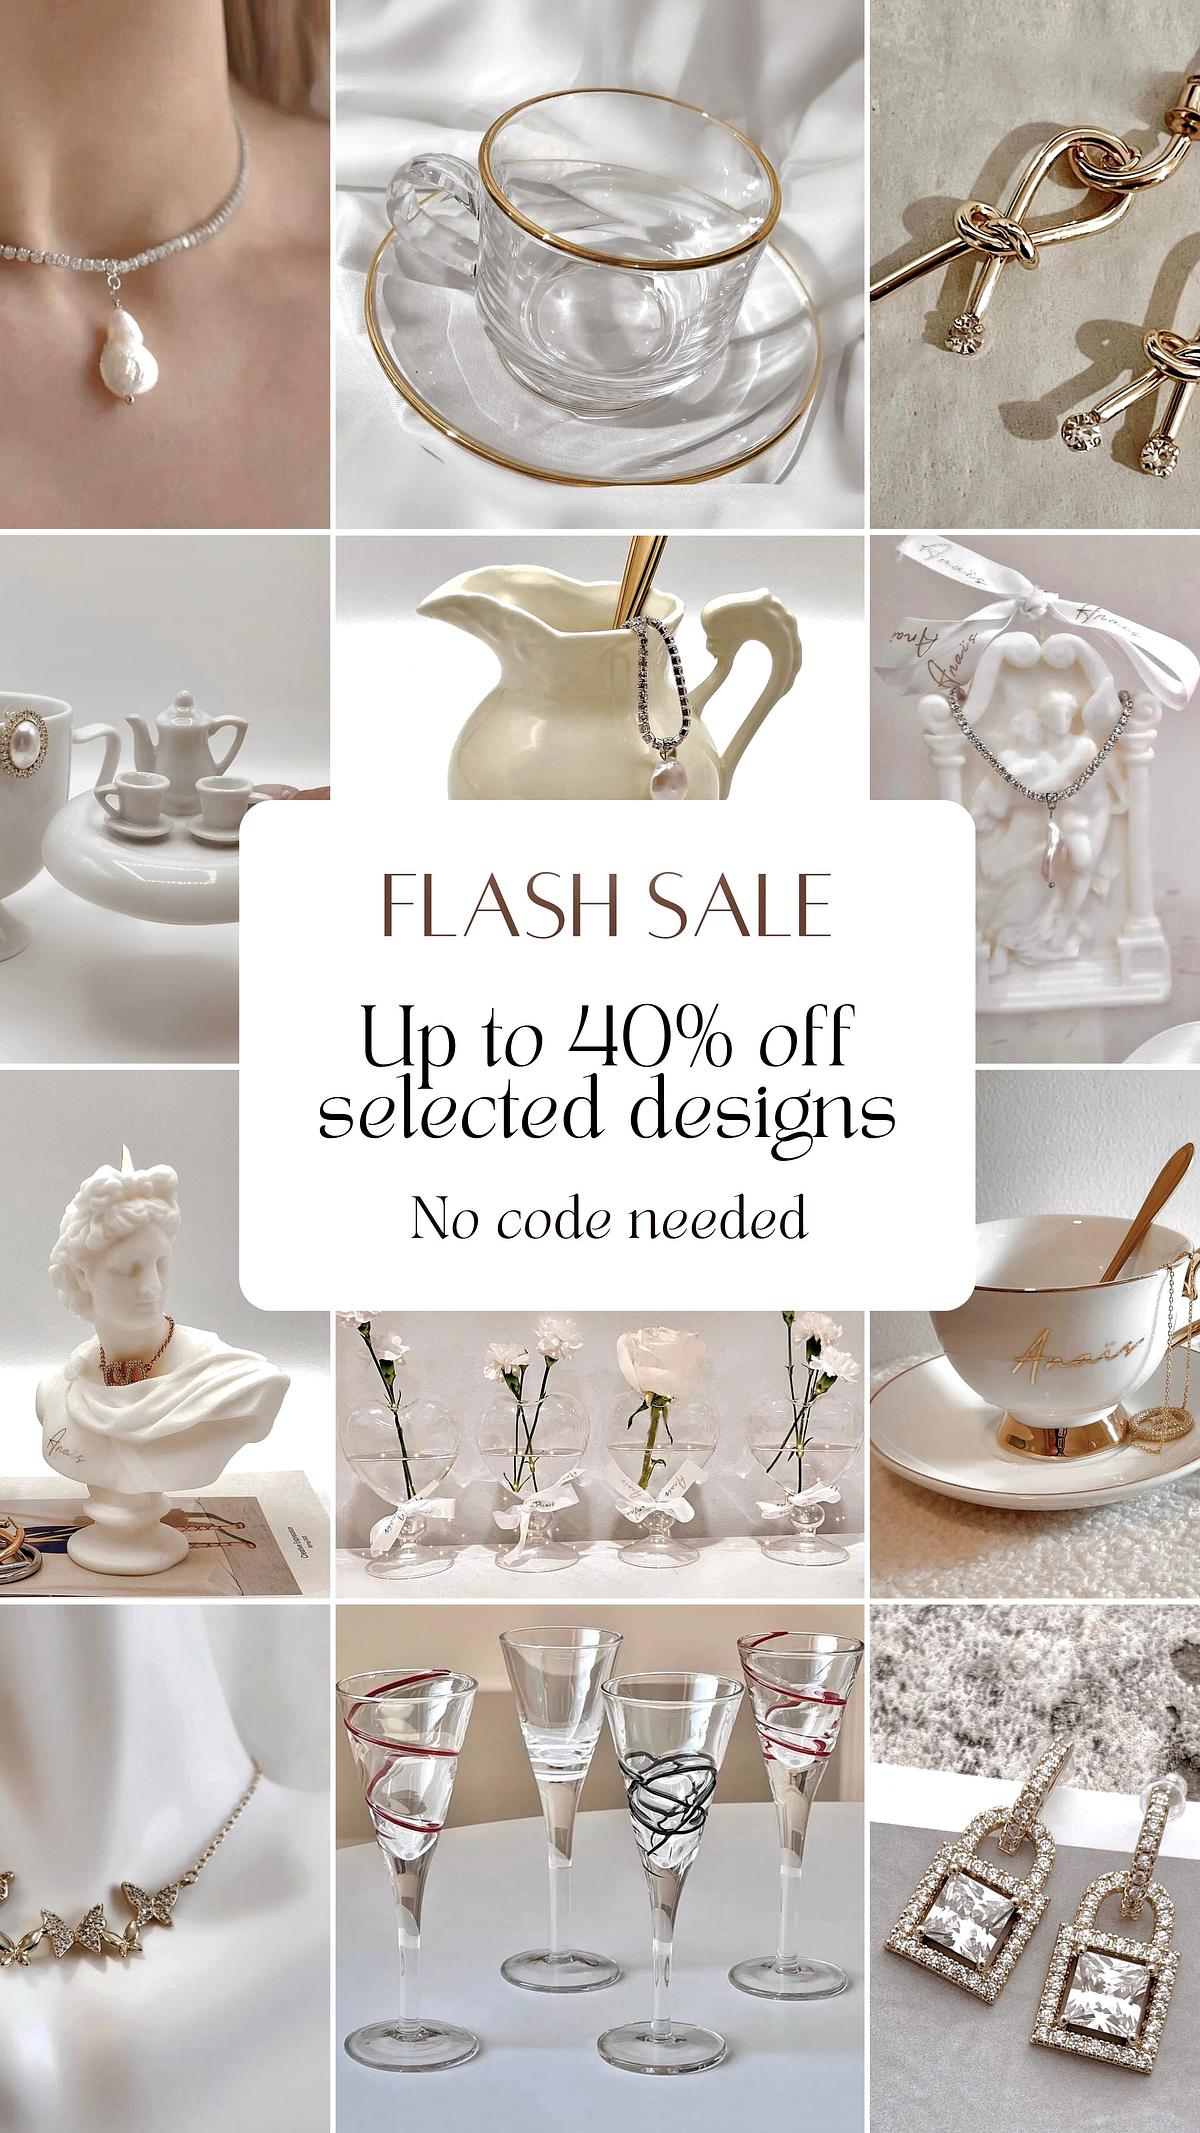 FLASH SALE Up to H40% off selected designs No code needed 